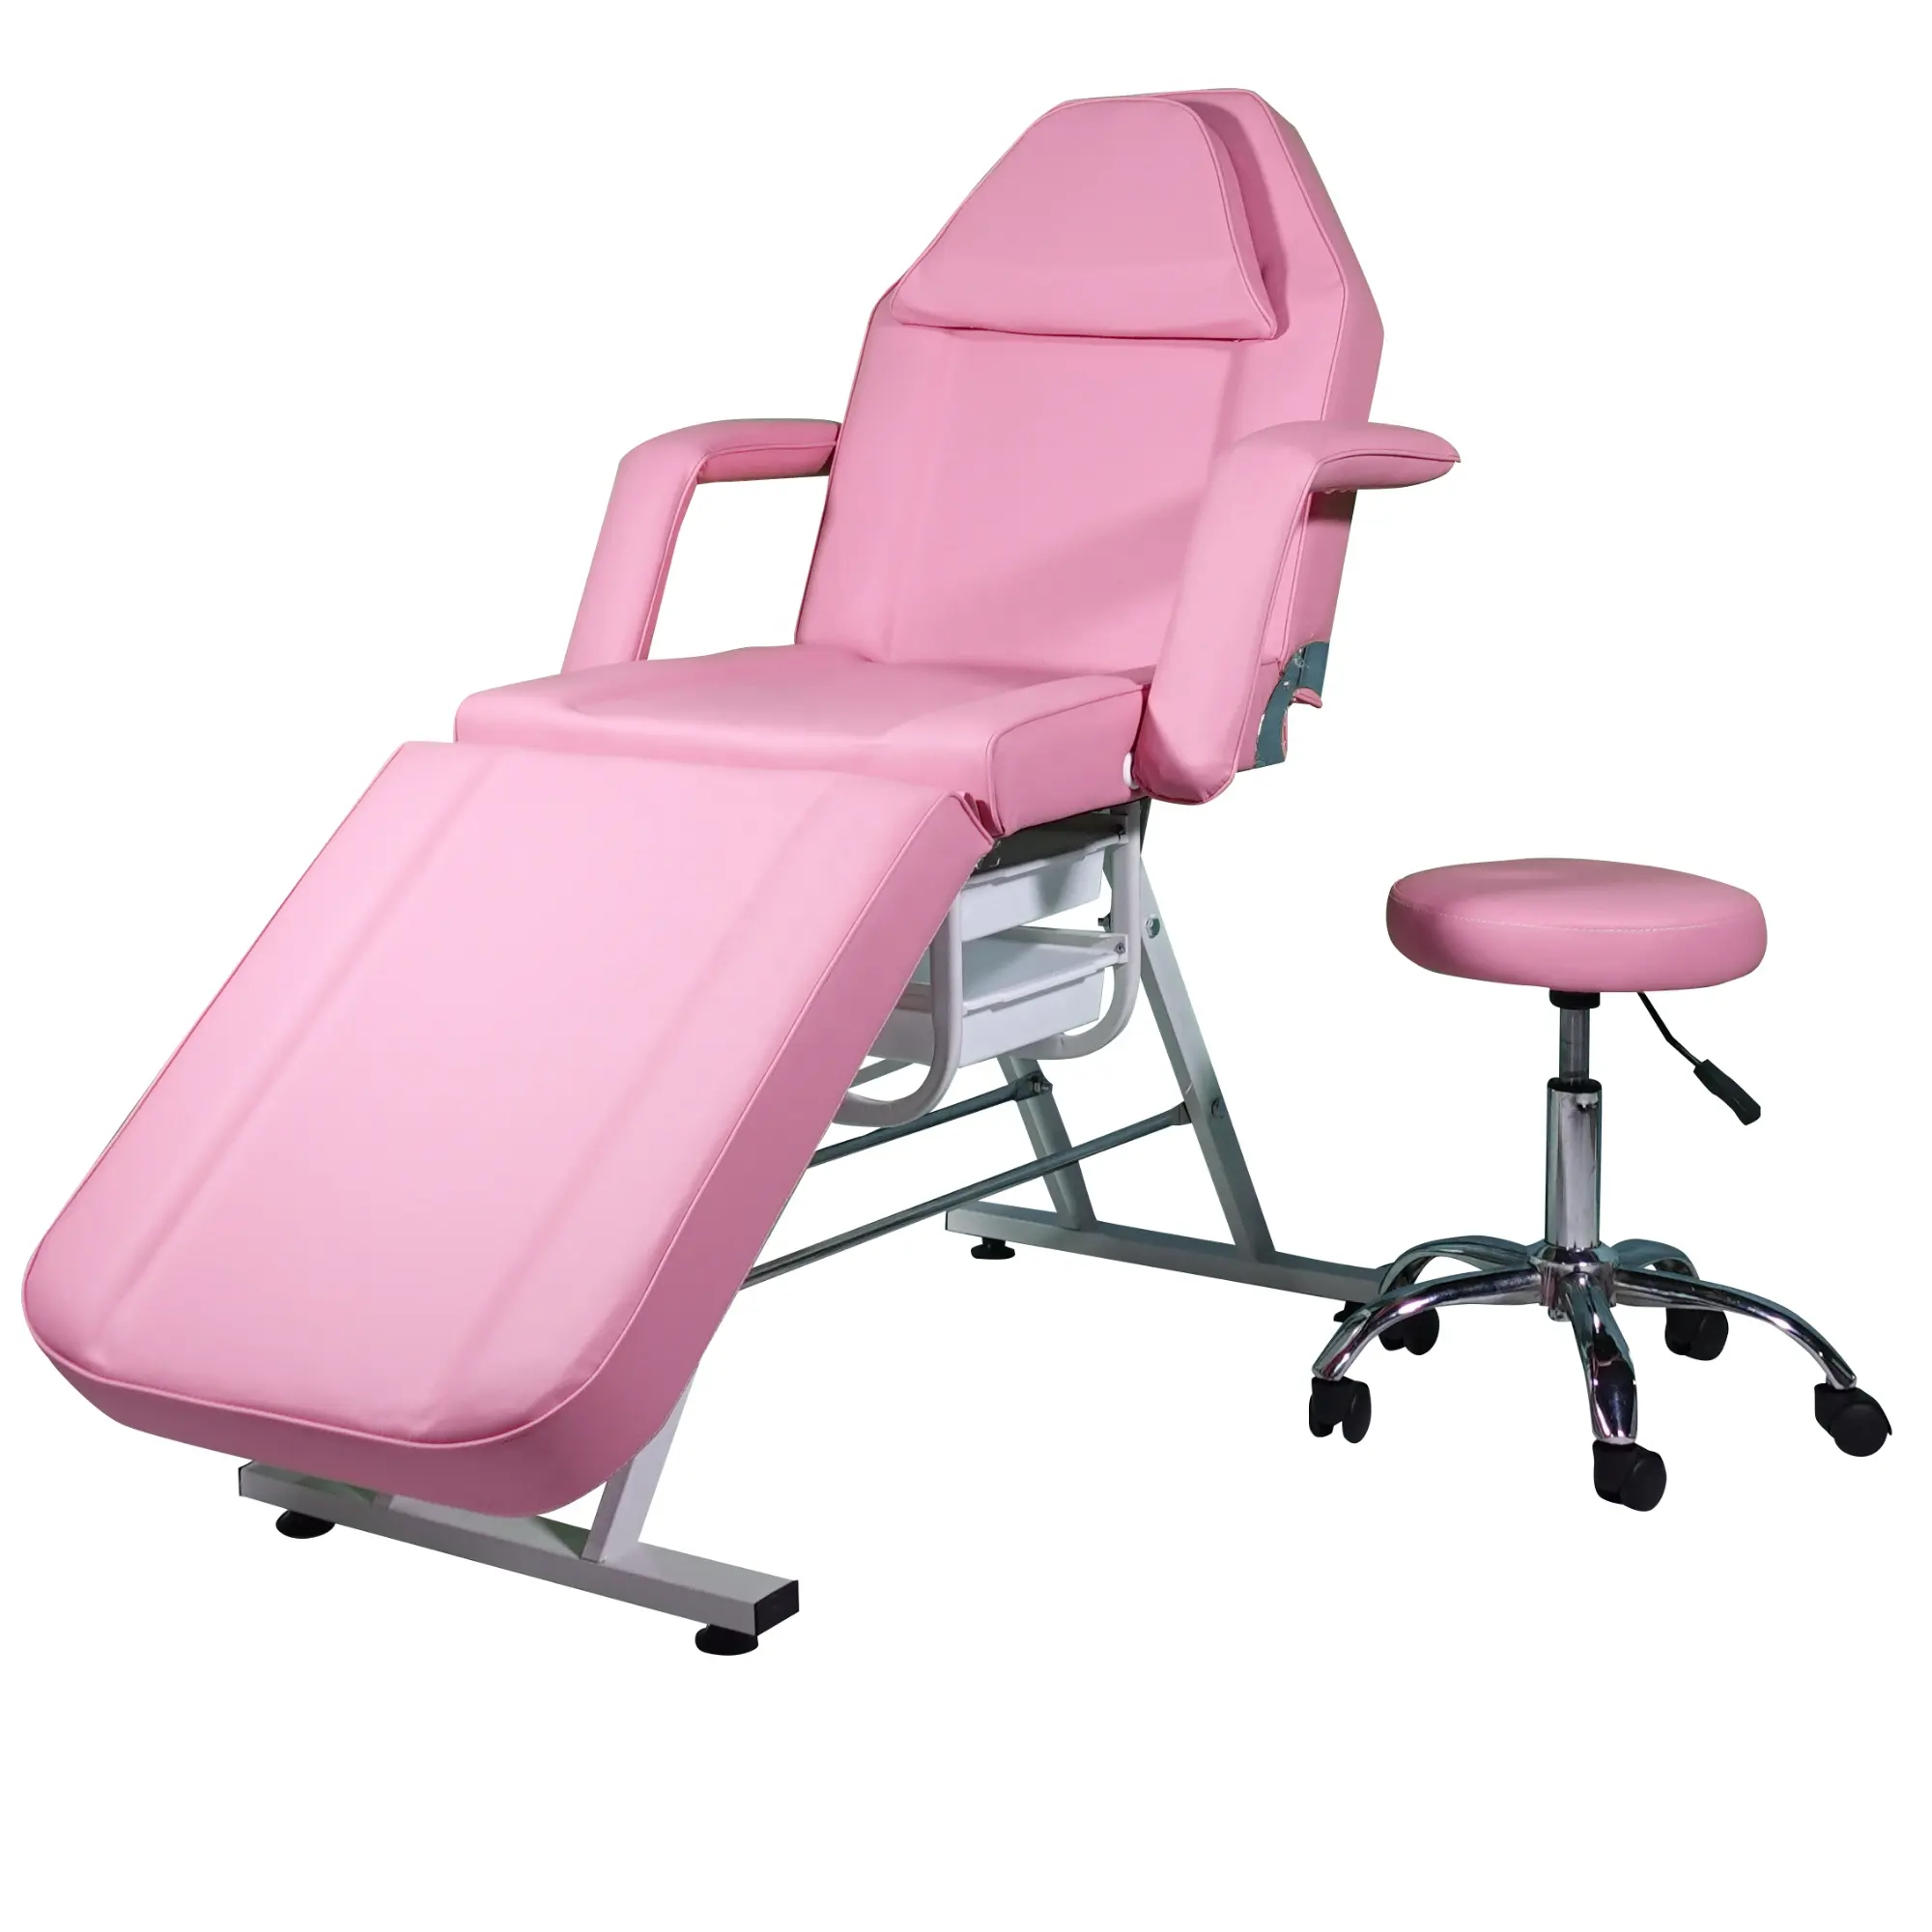 Korea Massage Bed Electric Spa Portable Beauty Bed Pedicure Chair For Salon Furniture